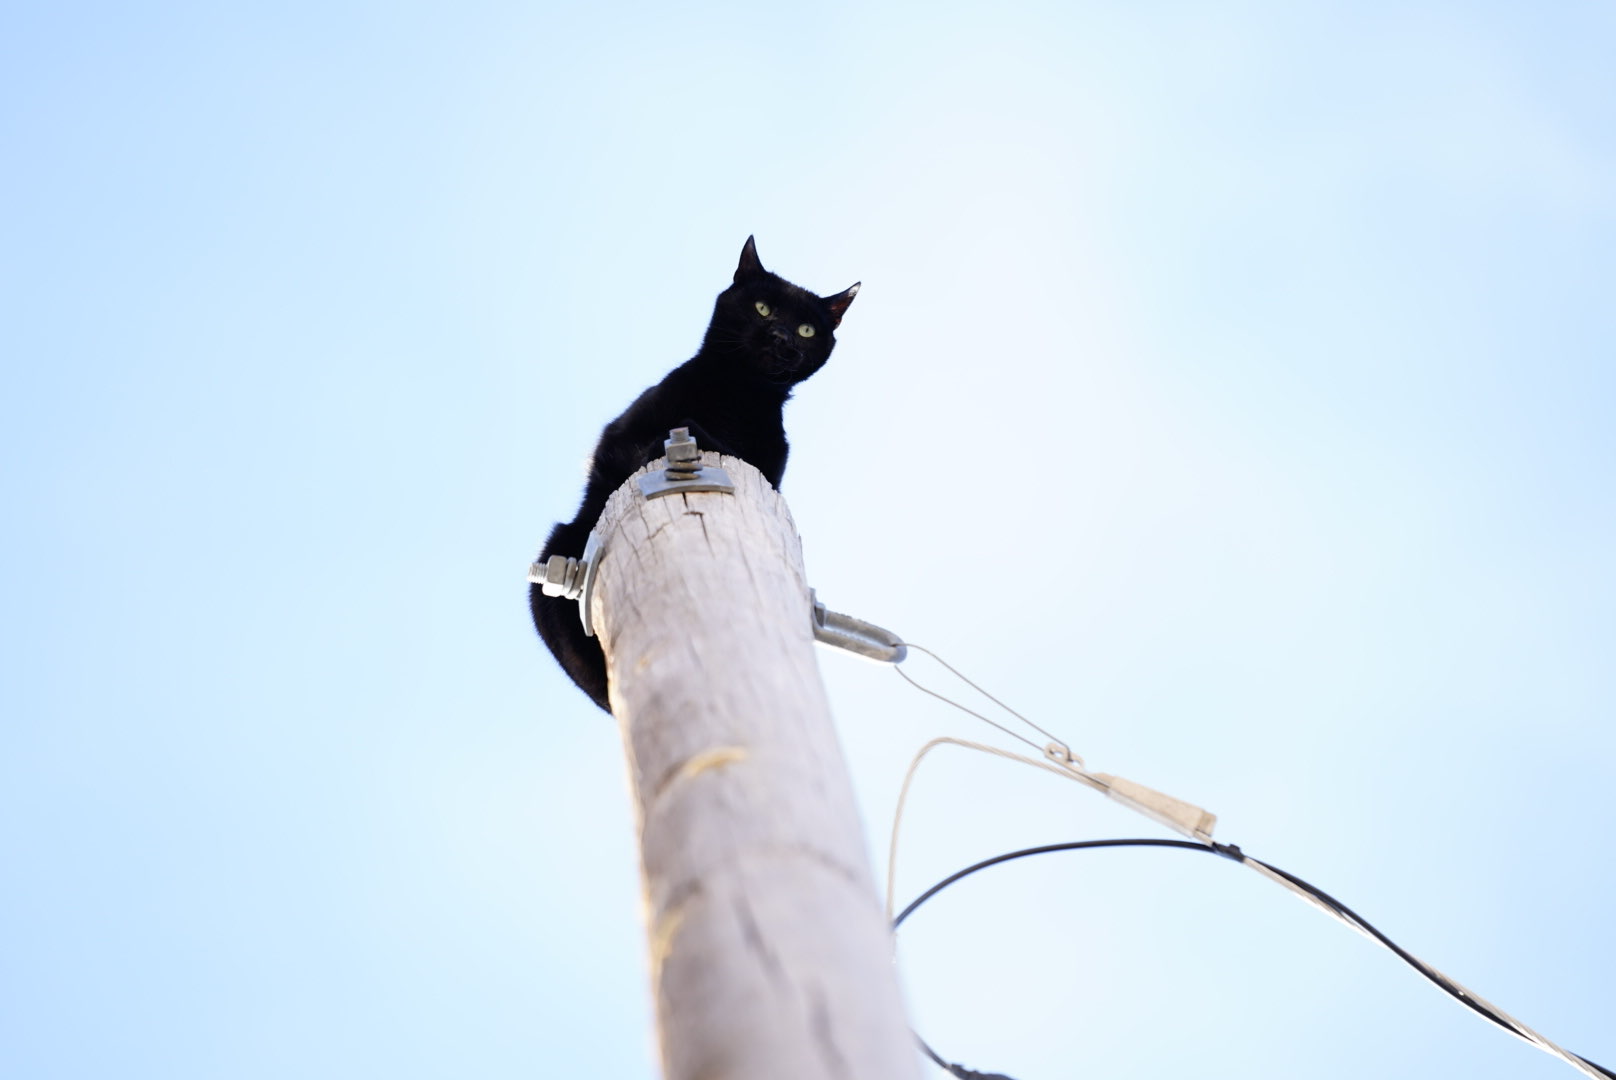 Black Cat Rescued From Telephone Pole